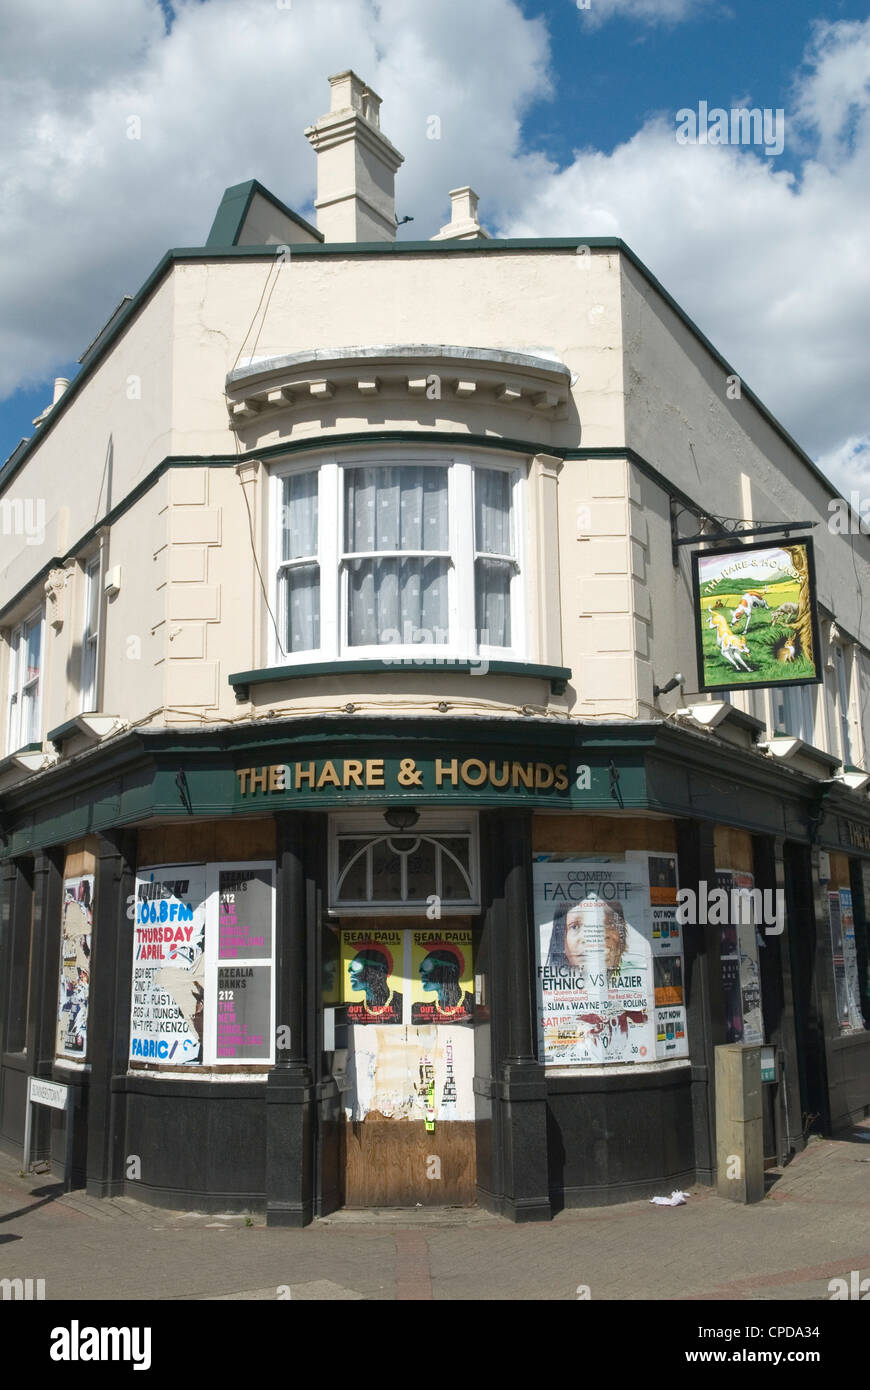 Pub closed down south London UK. The Hare and Hound public house.  HOMER SYKES Stock Photo